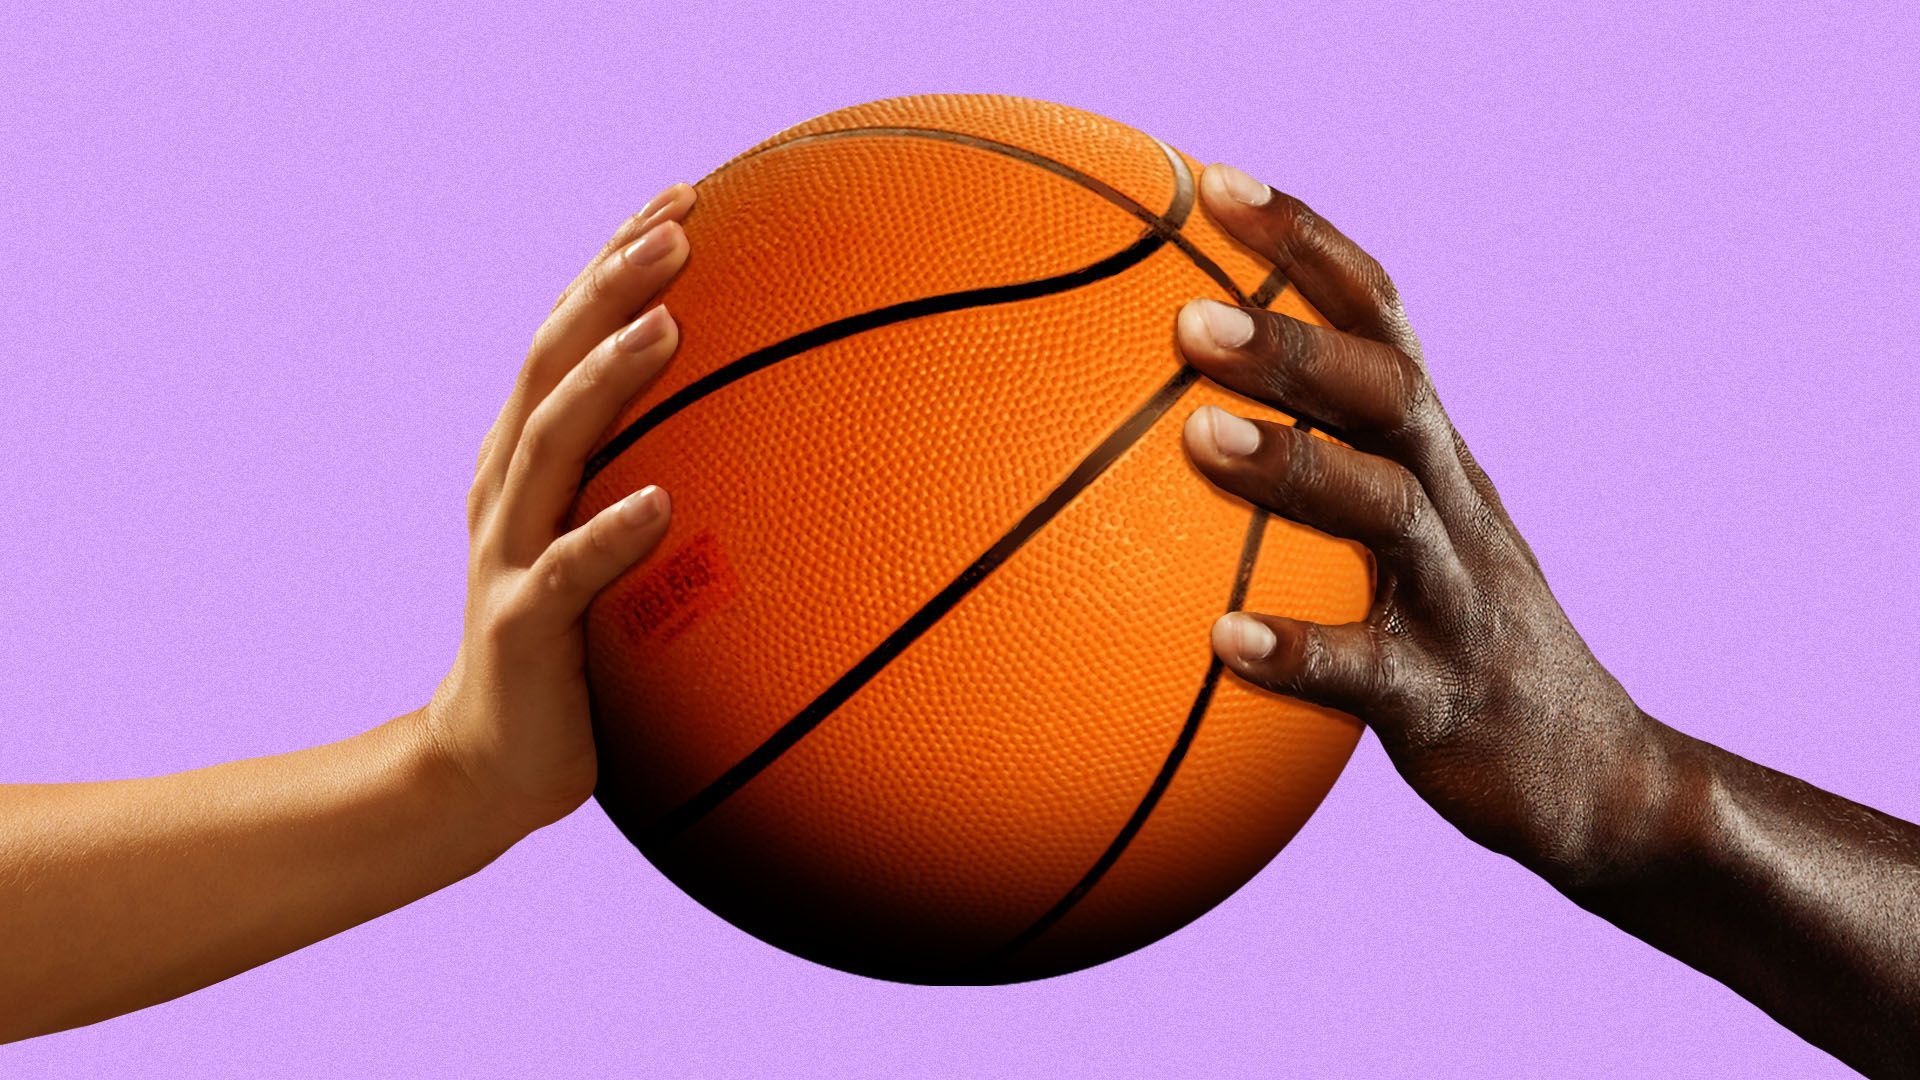 Illustration of a woman's and man's hand holding a basketball together